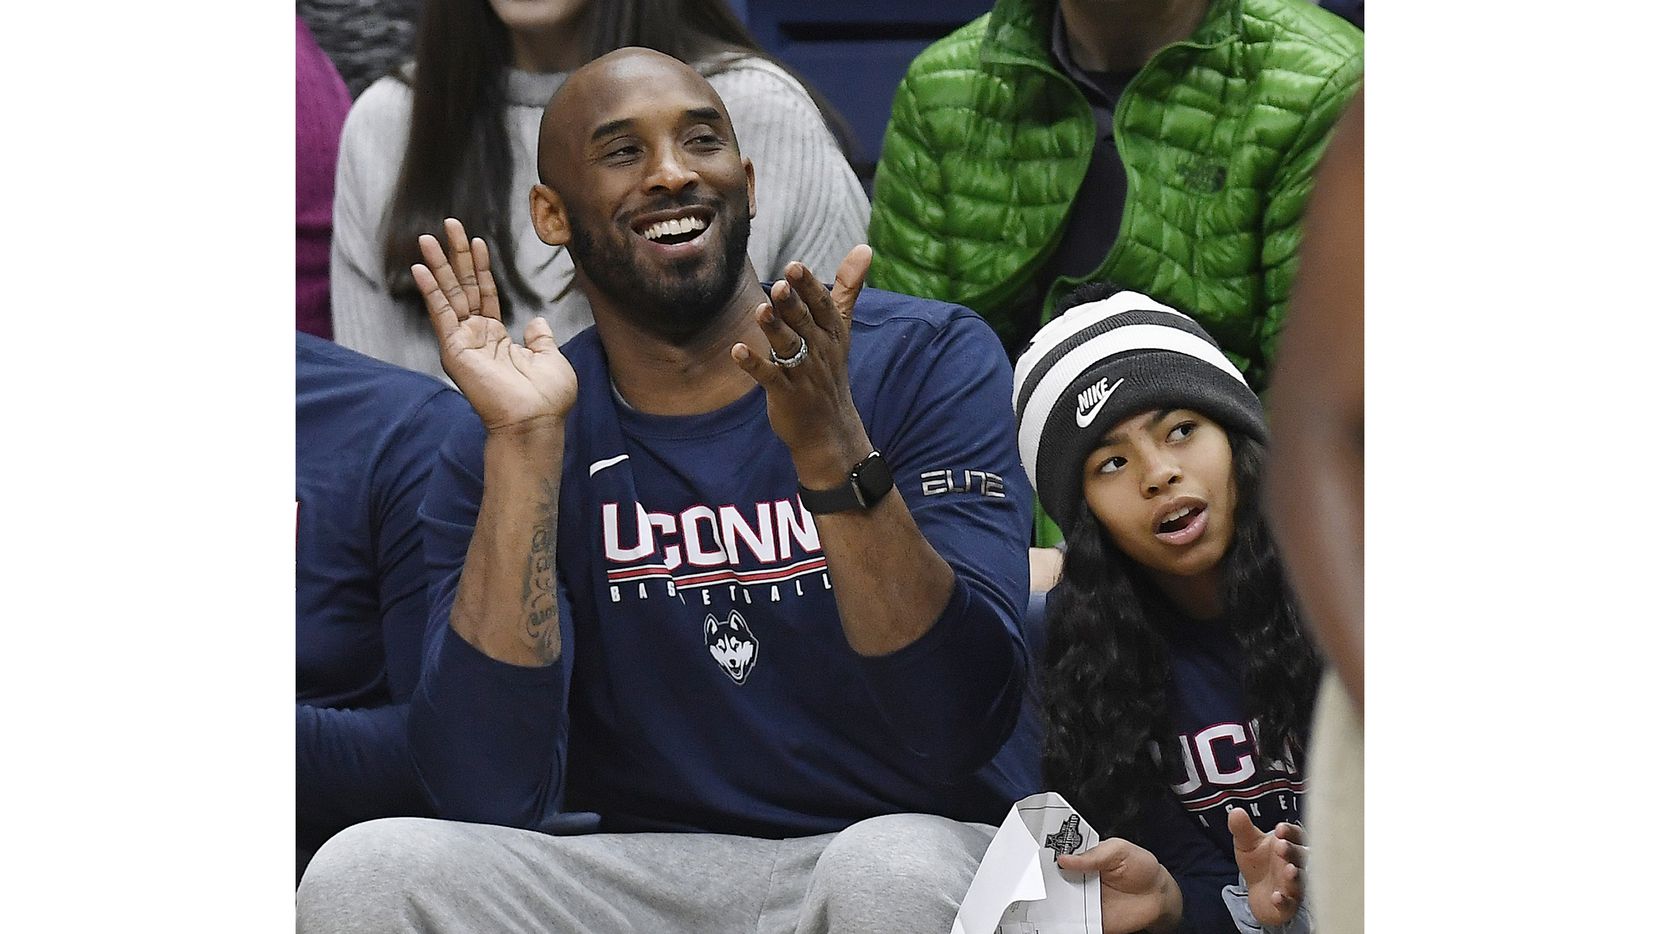 In this March 2, 2019 photo, Kobe Bryant and his daughter Gianna watch the first half of an NCAA college basketball game between Connecticut and Houston in Storrs, Conn. Dads with daughters inspired by Kobe Bryant's special bond with his 13-year-old Gianna took to social media to celebrate their own daughters in words and photos using the hashtag #GirlDads. Bryant and his daughter died in a helicopter crash on Sunday, Jan. 26, 2020.